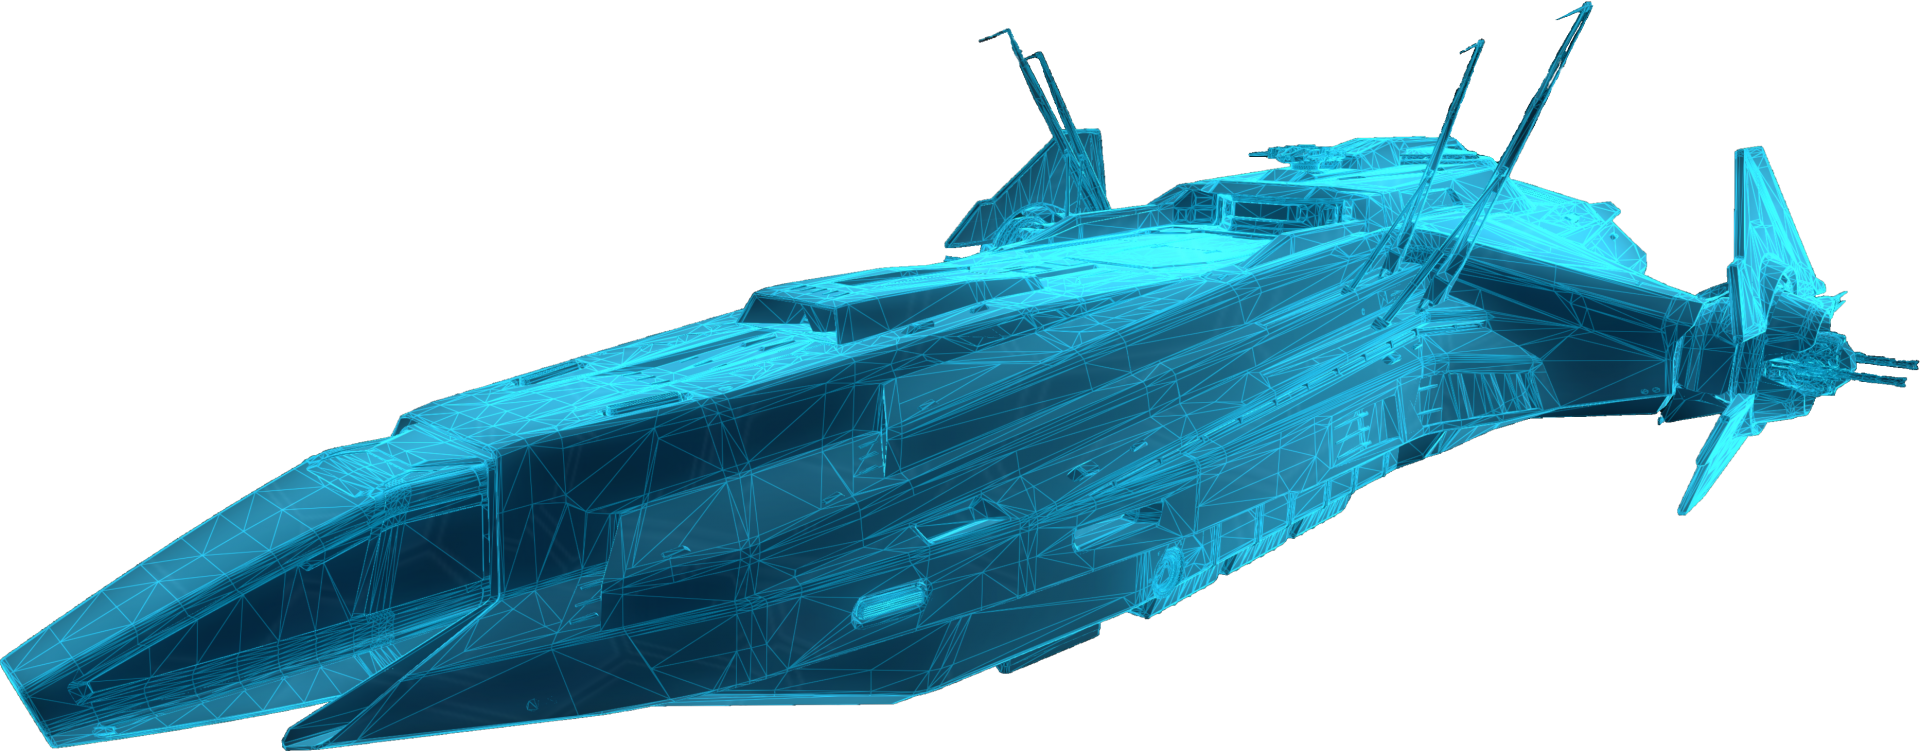 Carrack-Holo-Viewer_trans.png